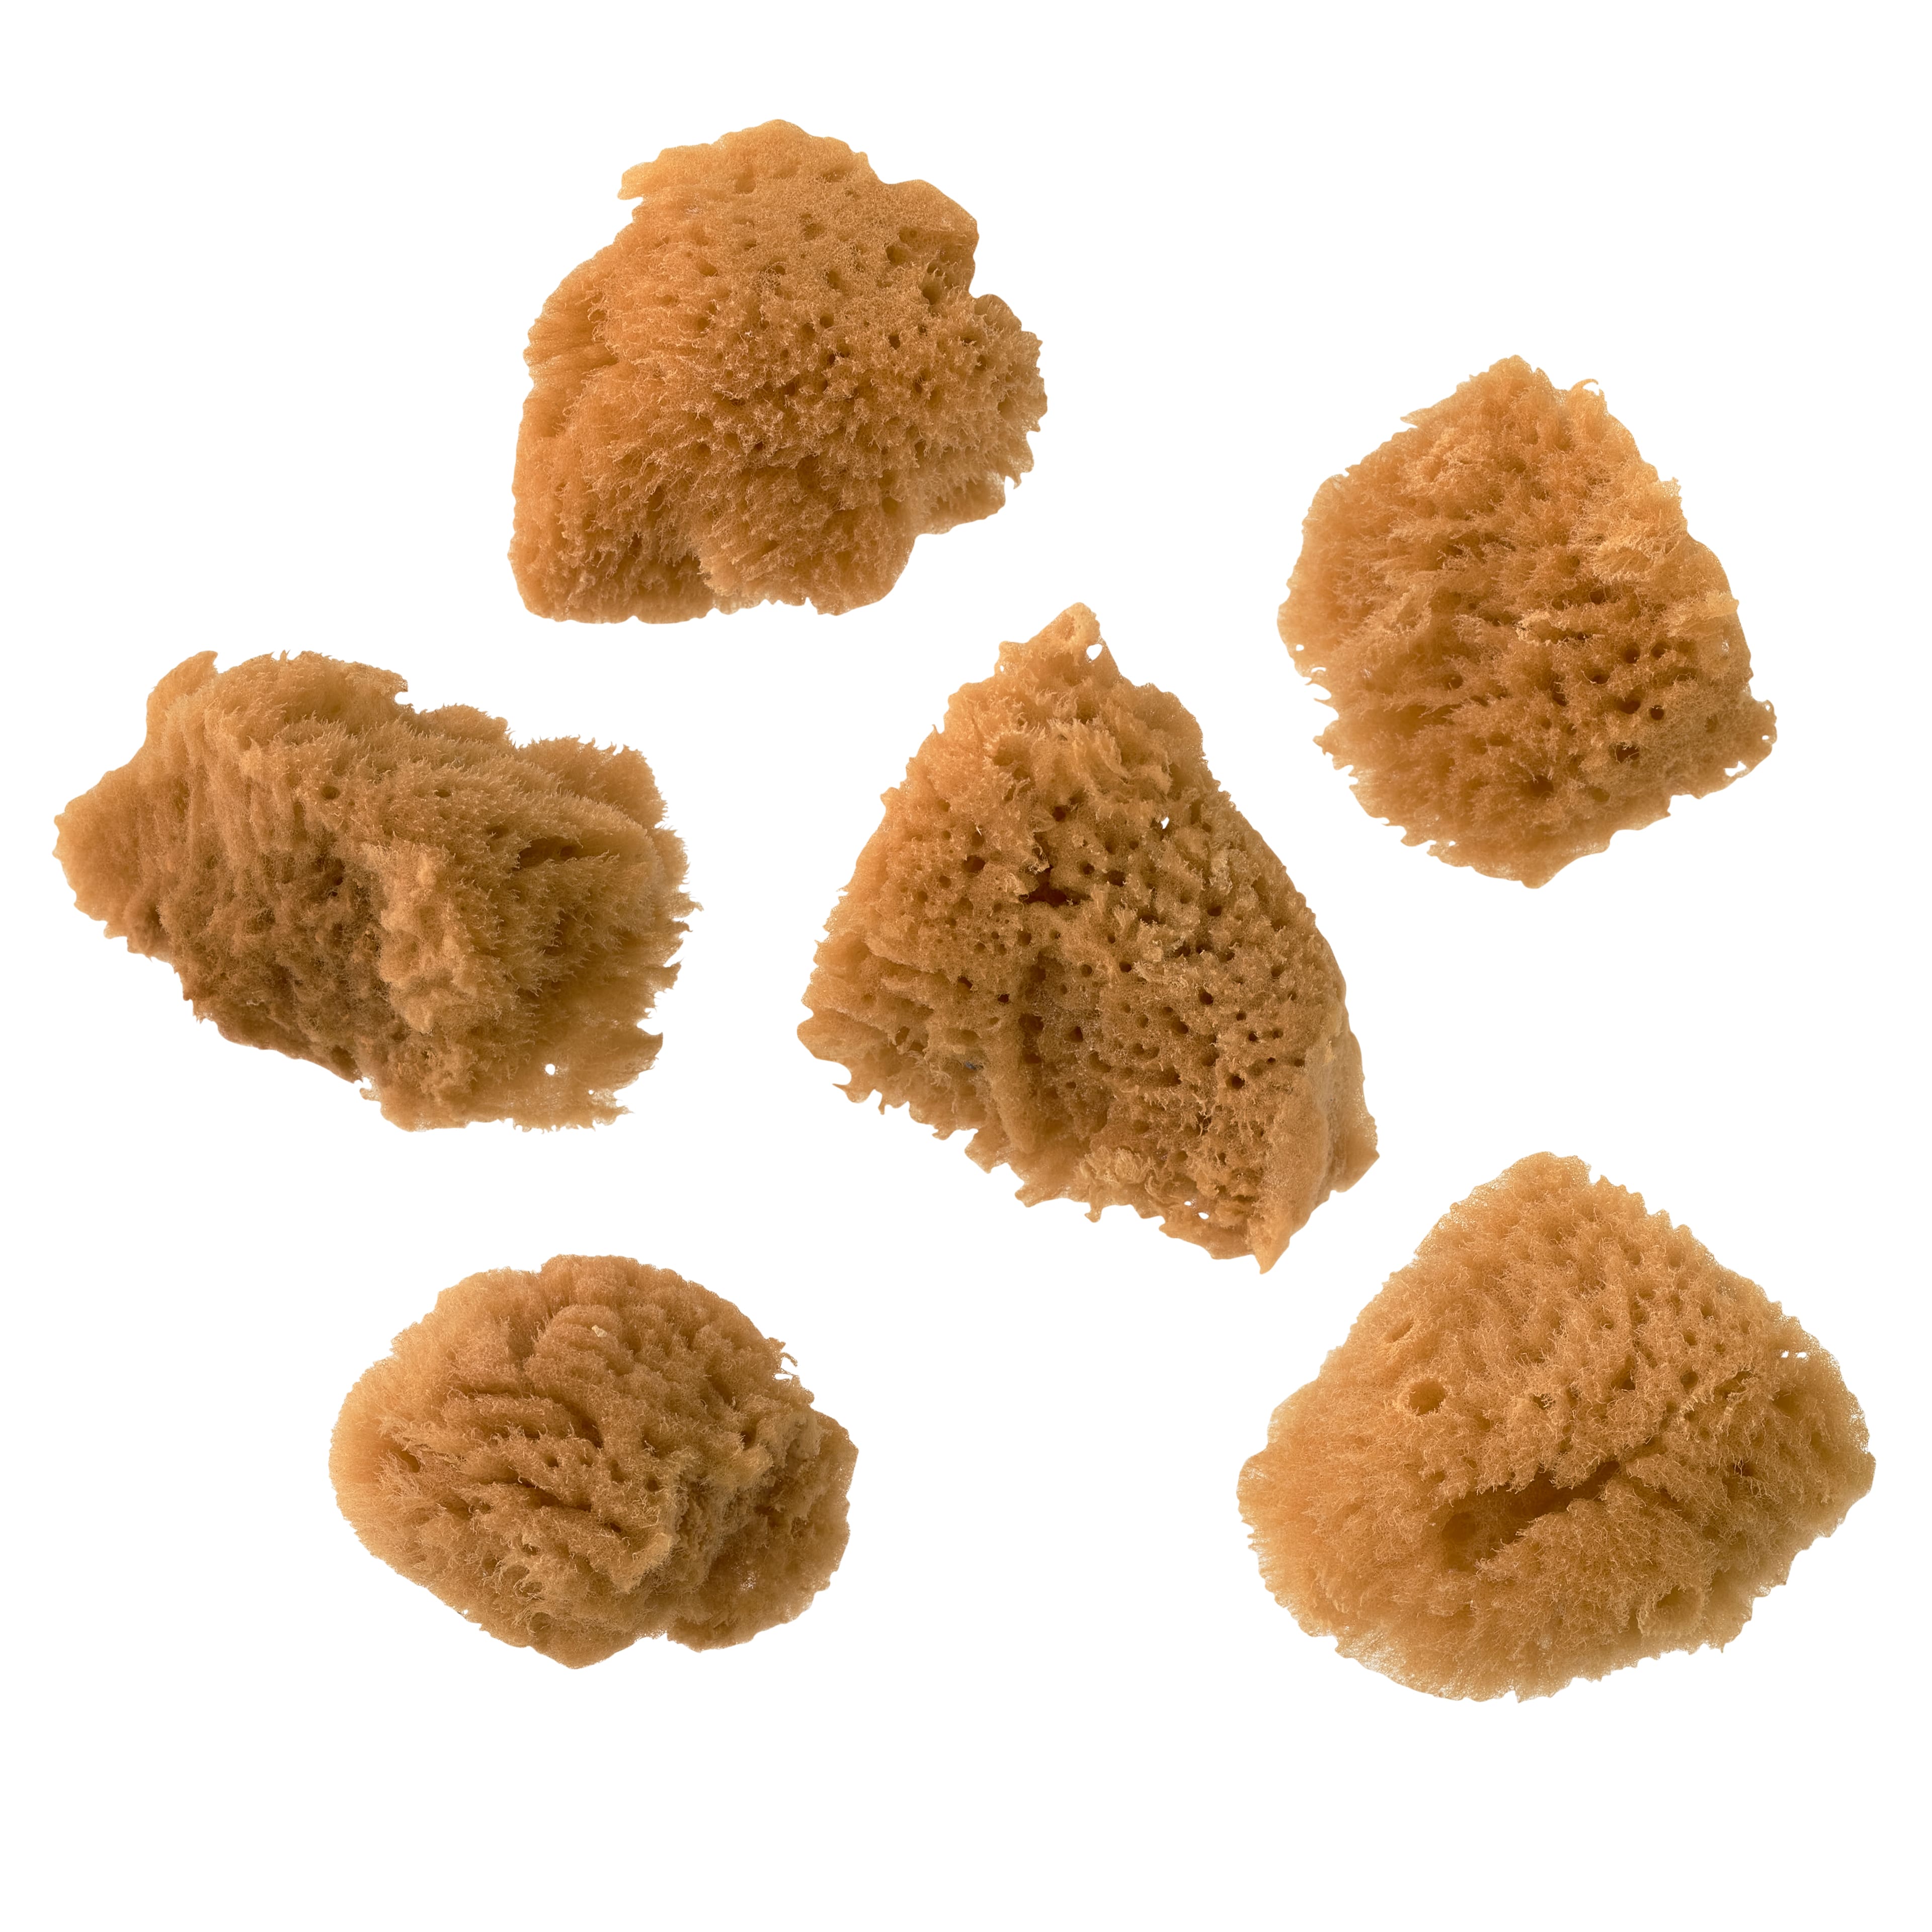 Royal & Langnickel Crafter's Choice 5pc. Sea Sponge Pack